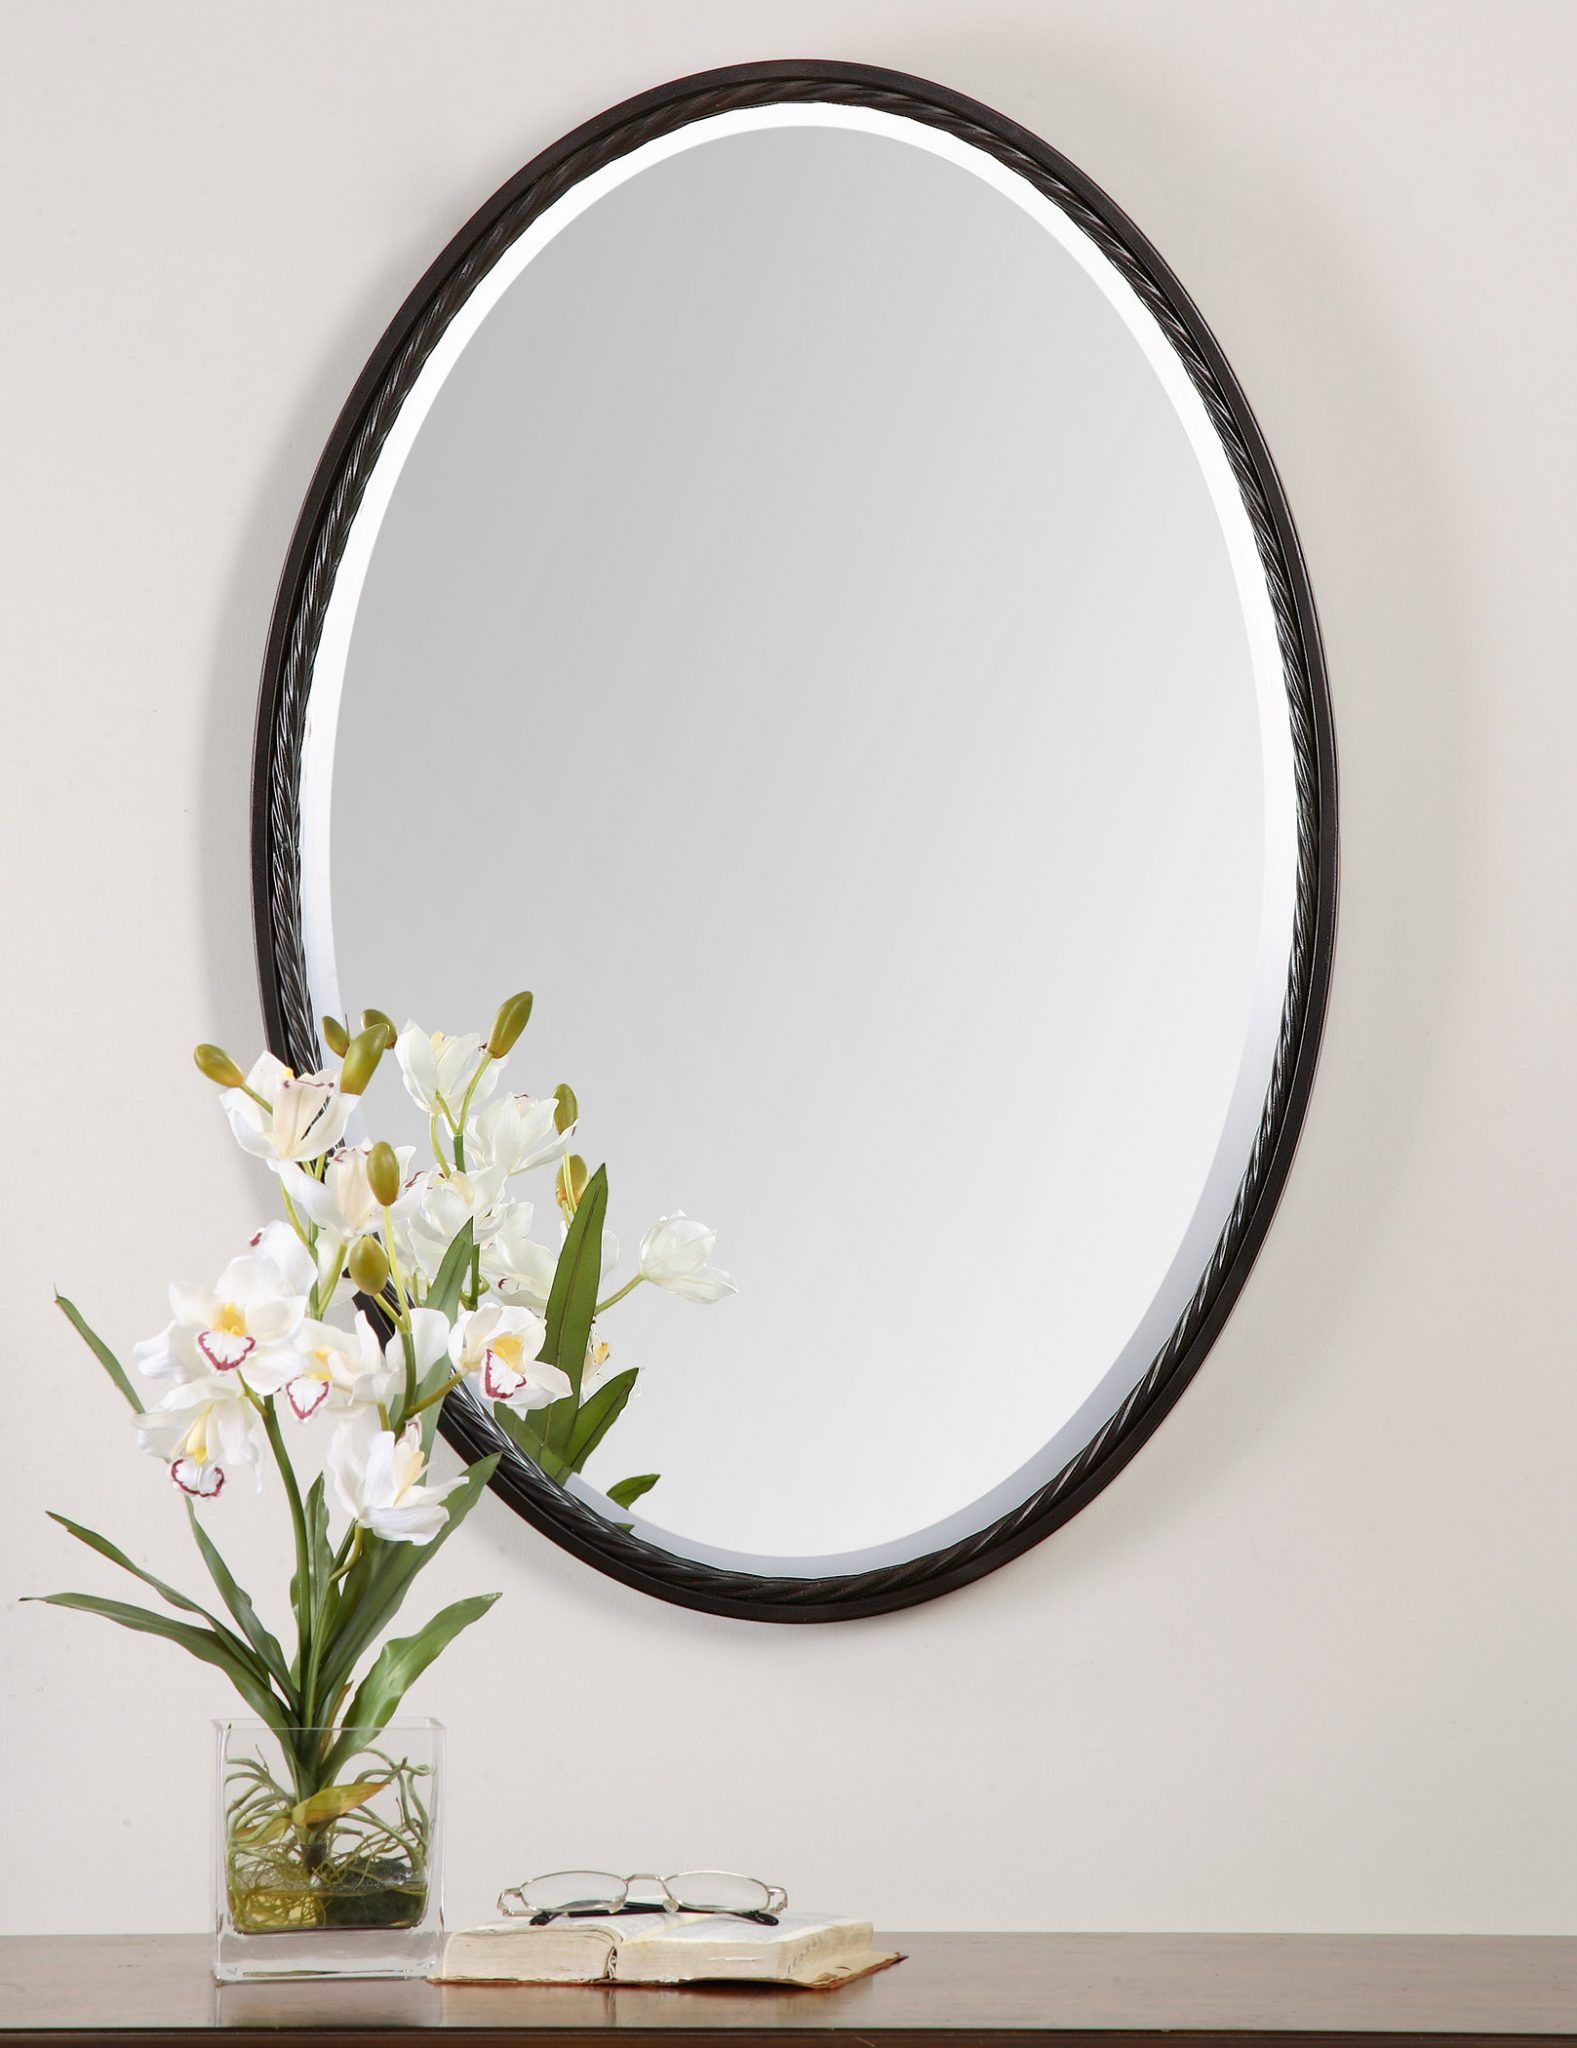 Uttermost Casalina Oil Rubbed Bronze Oval Mirror – Sacksteder's Pertaining To Oil Rubbed Bronze Finish Oval Wall Mirrors (View 15 of 15)